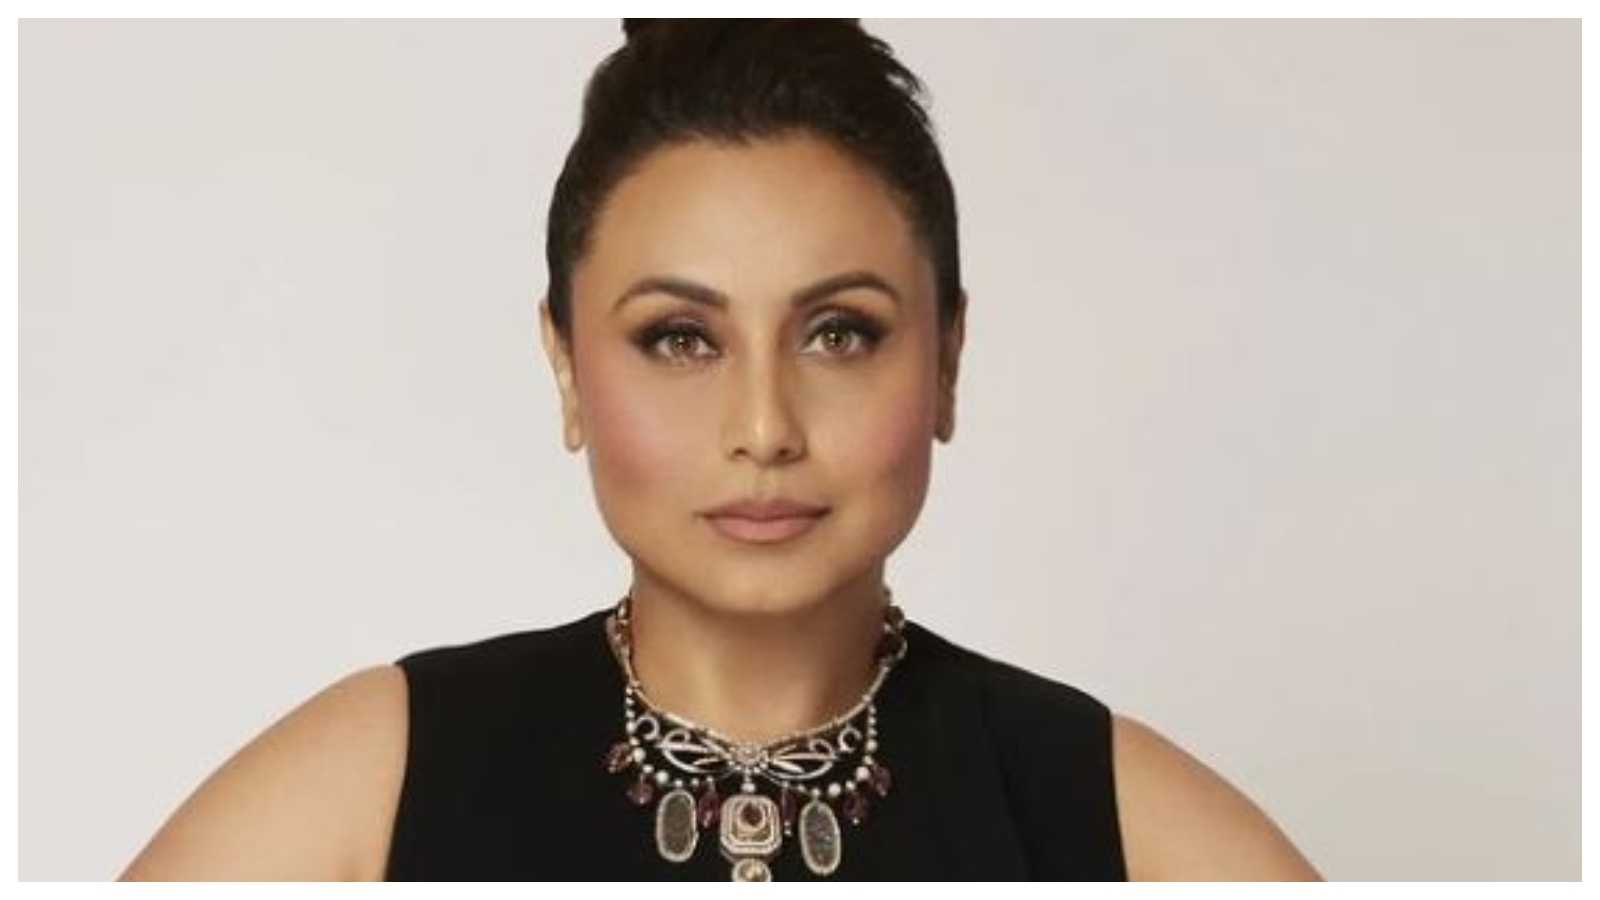 ‘I love to be a part of stories where the woman shatters the glass ceiling' : Rani Mukerji